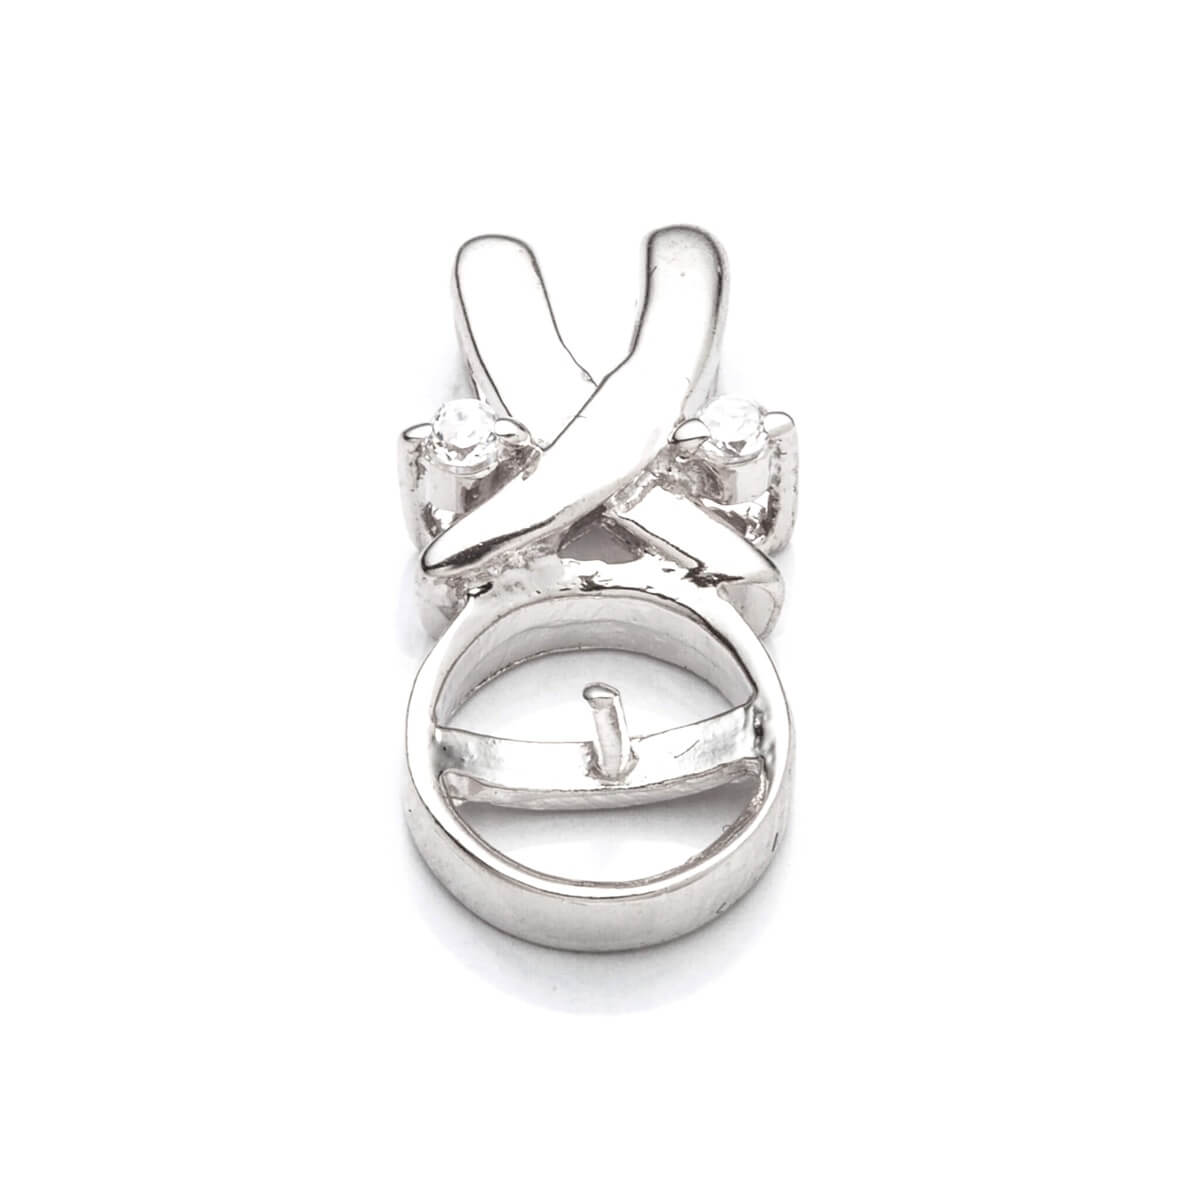 Oval Pendant with Cubic Zirconia Inlays and Cup and Peg Mounting in Sterling Silver 8mm